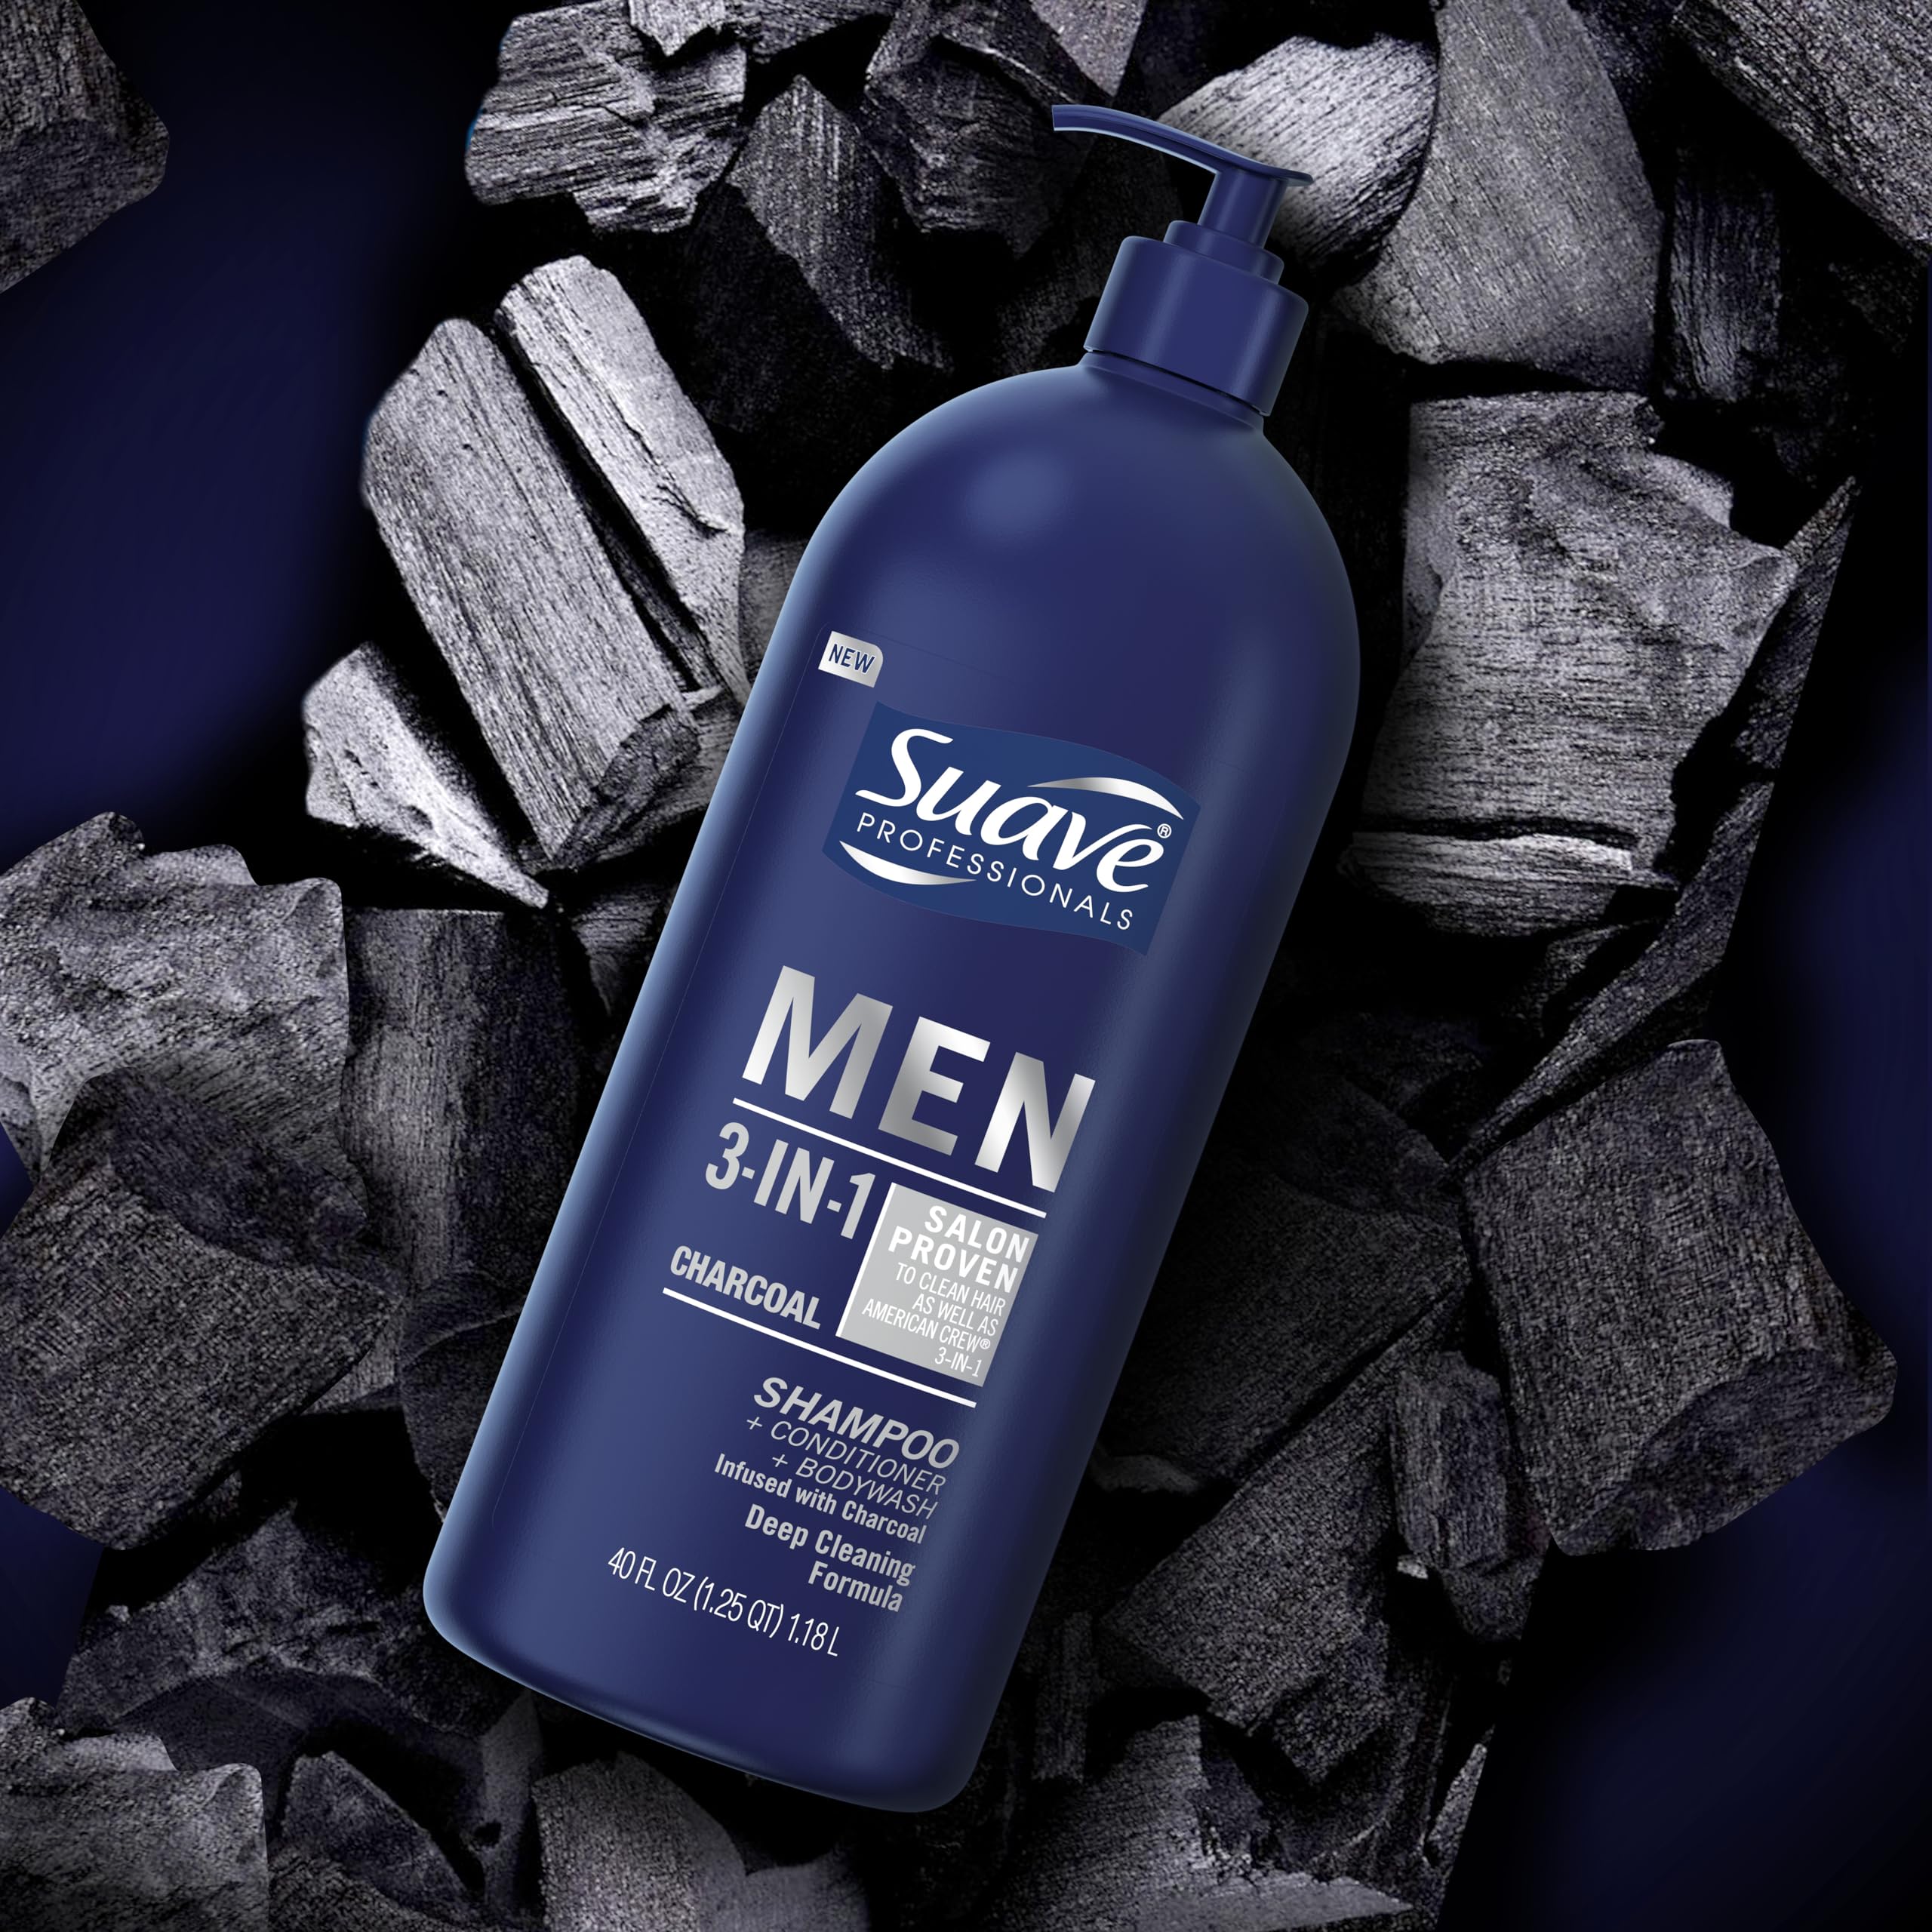 Suave Men 3 in 1 Charcoal &Warm Ginger Shampoo Conditioner Bodywash to Cleanse and Nourish Hair and Skin, 40 oz Pack of 3